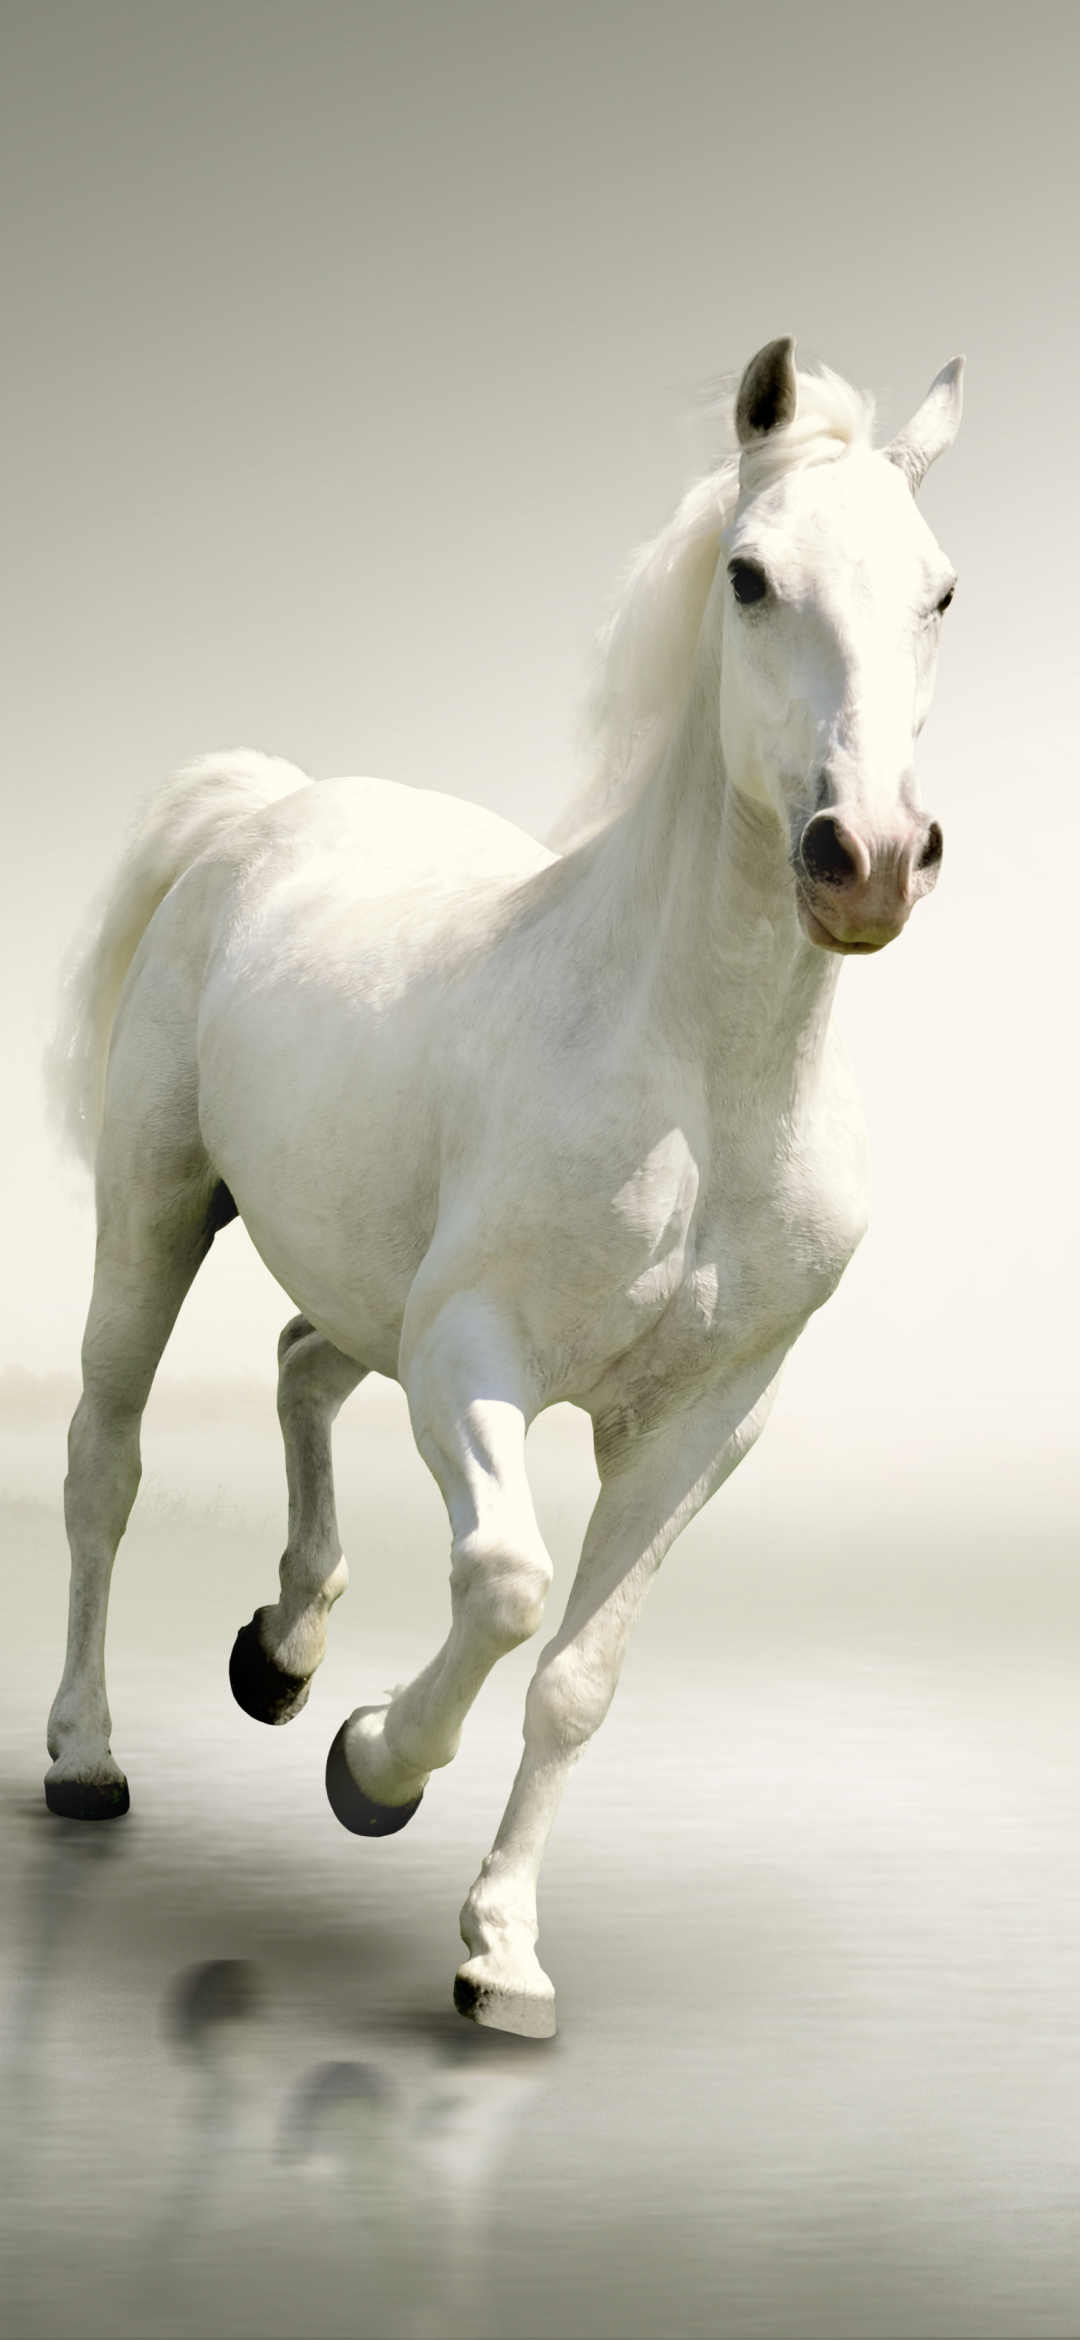 Horse Mobile Image | 2160x3840 resolution wallpaper